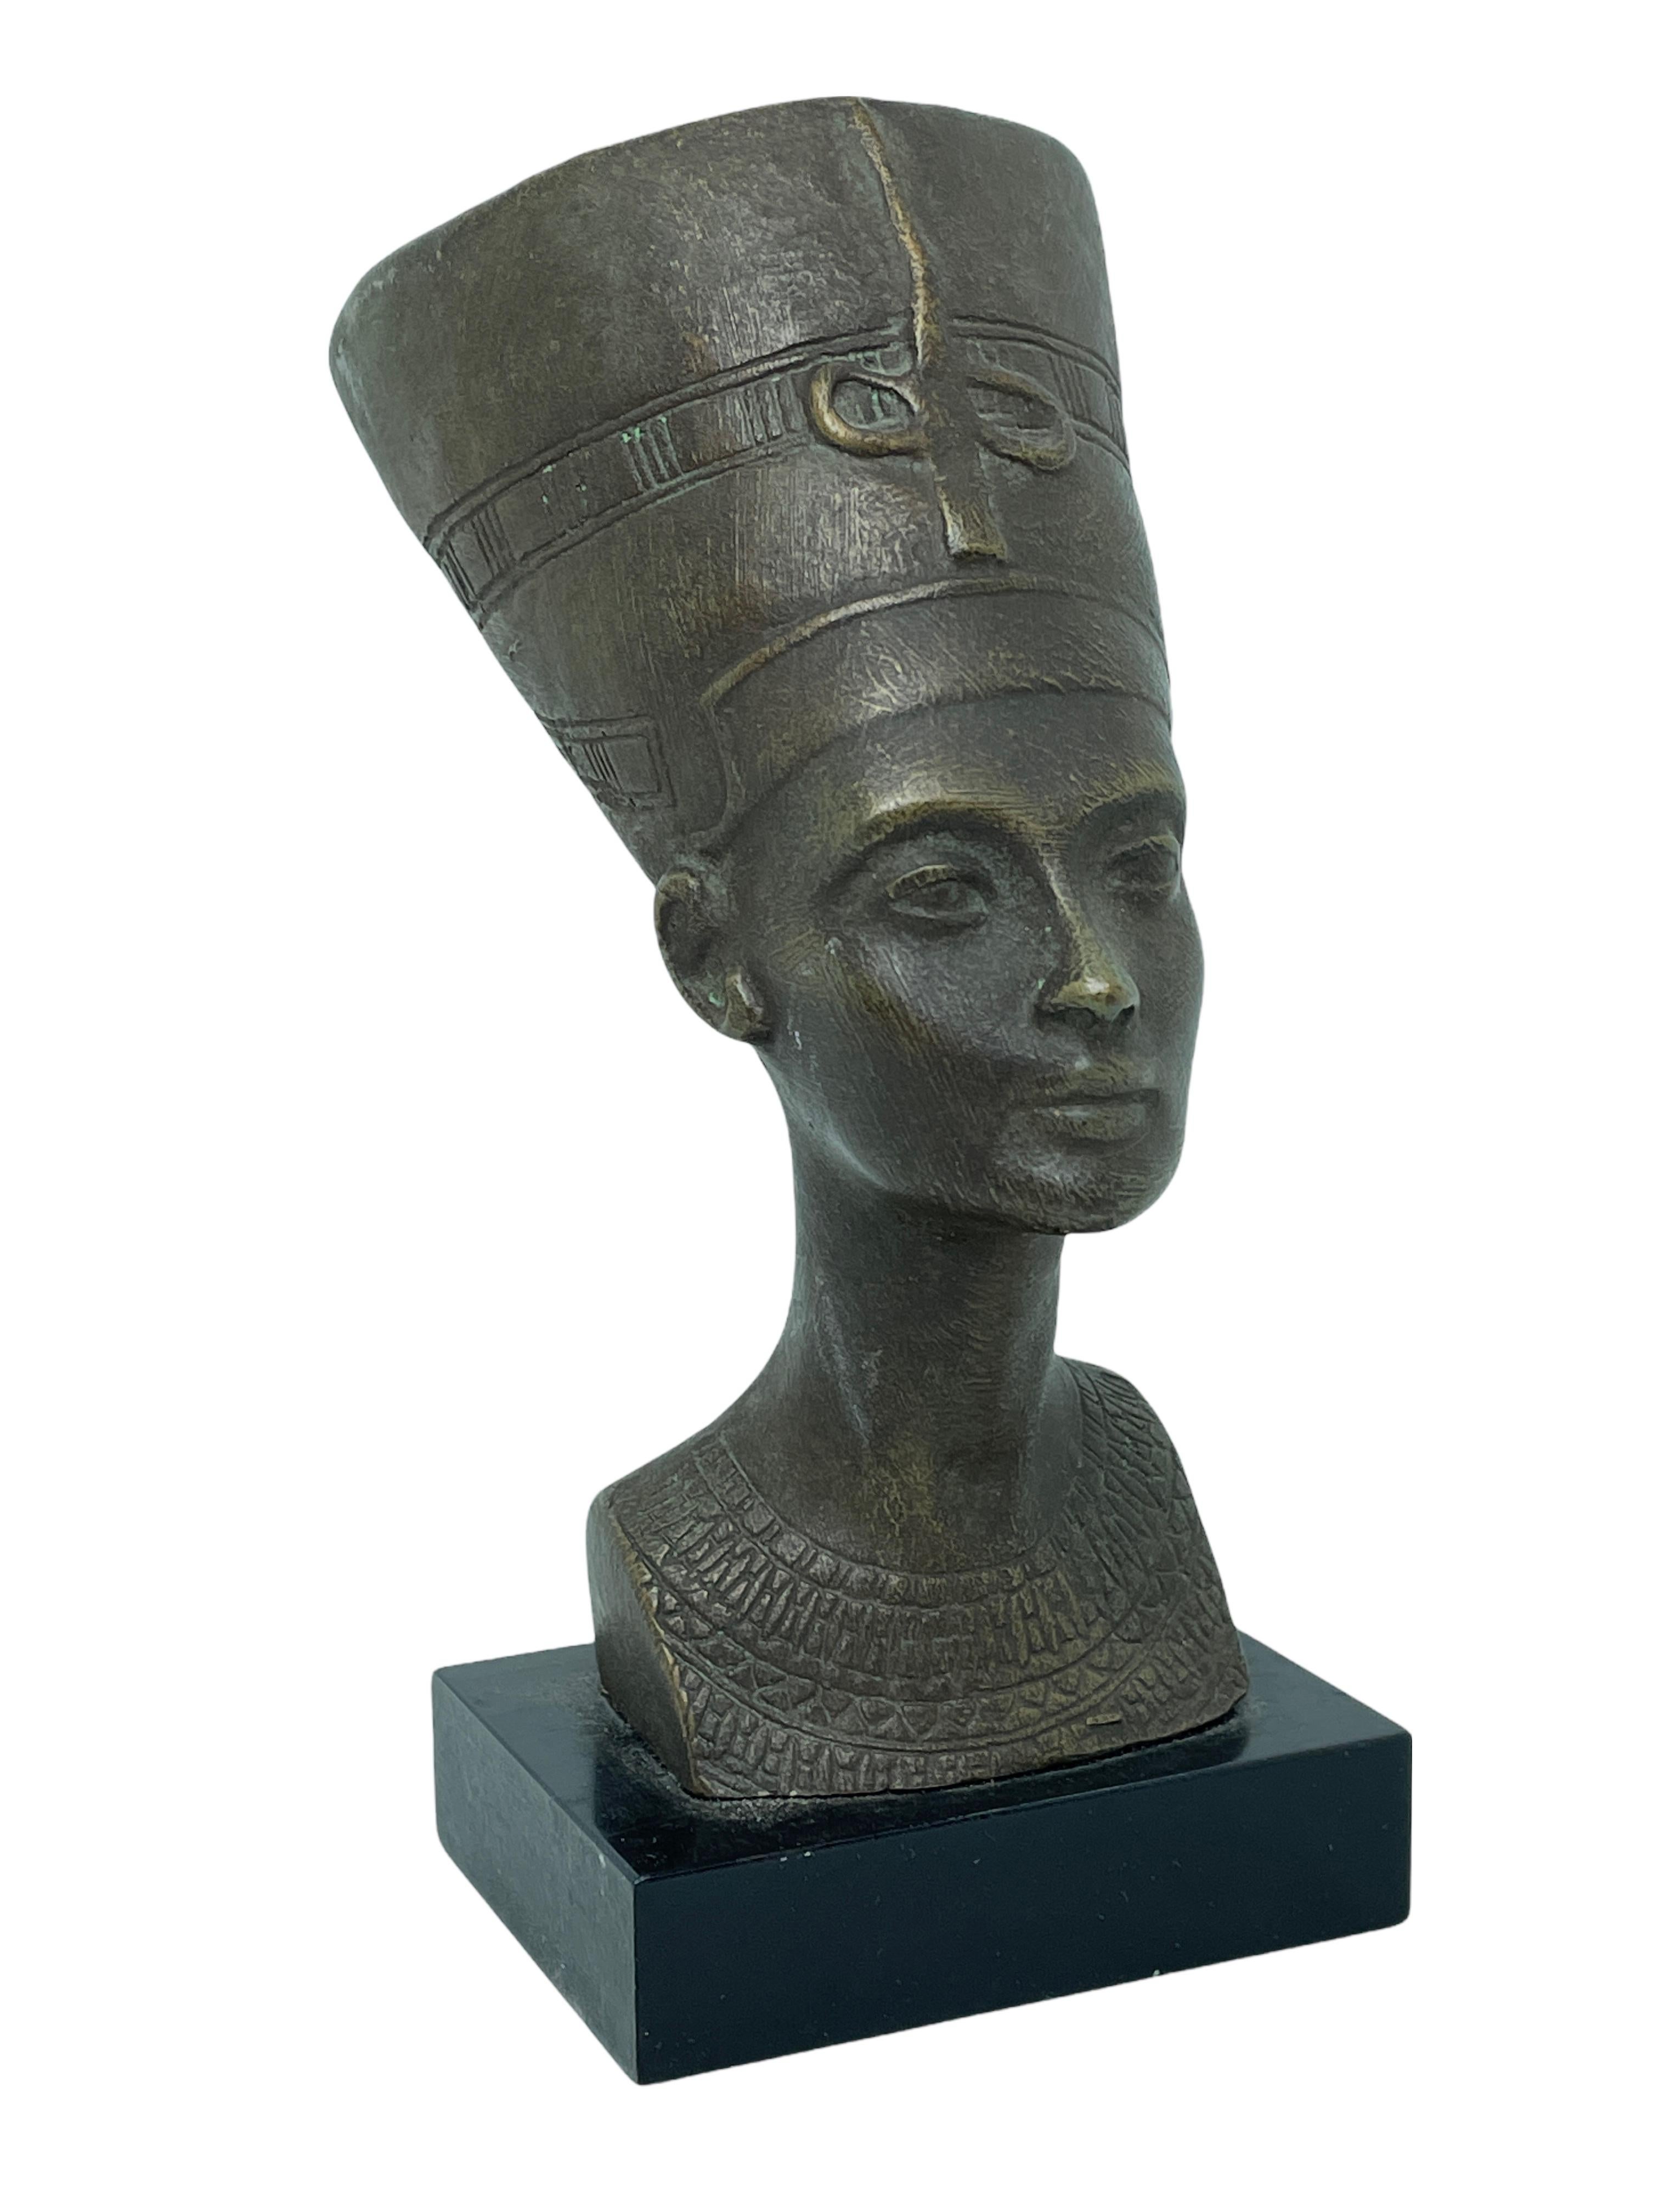 A classic decorative Bust statue. Some wear with a nice patina, but this is old-age. Made of Achatit a Stoneware Handwork. Very decorative and nice to display in your library or any room.